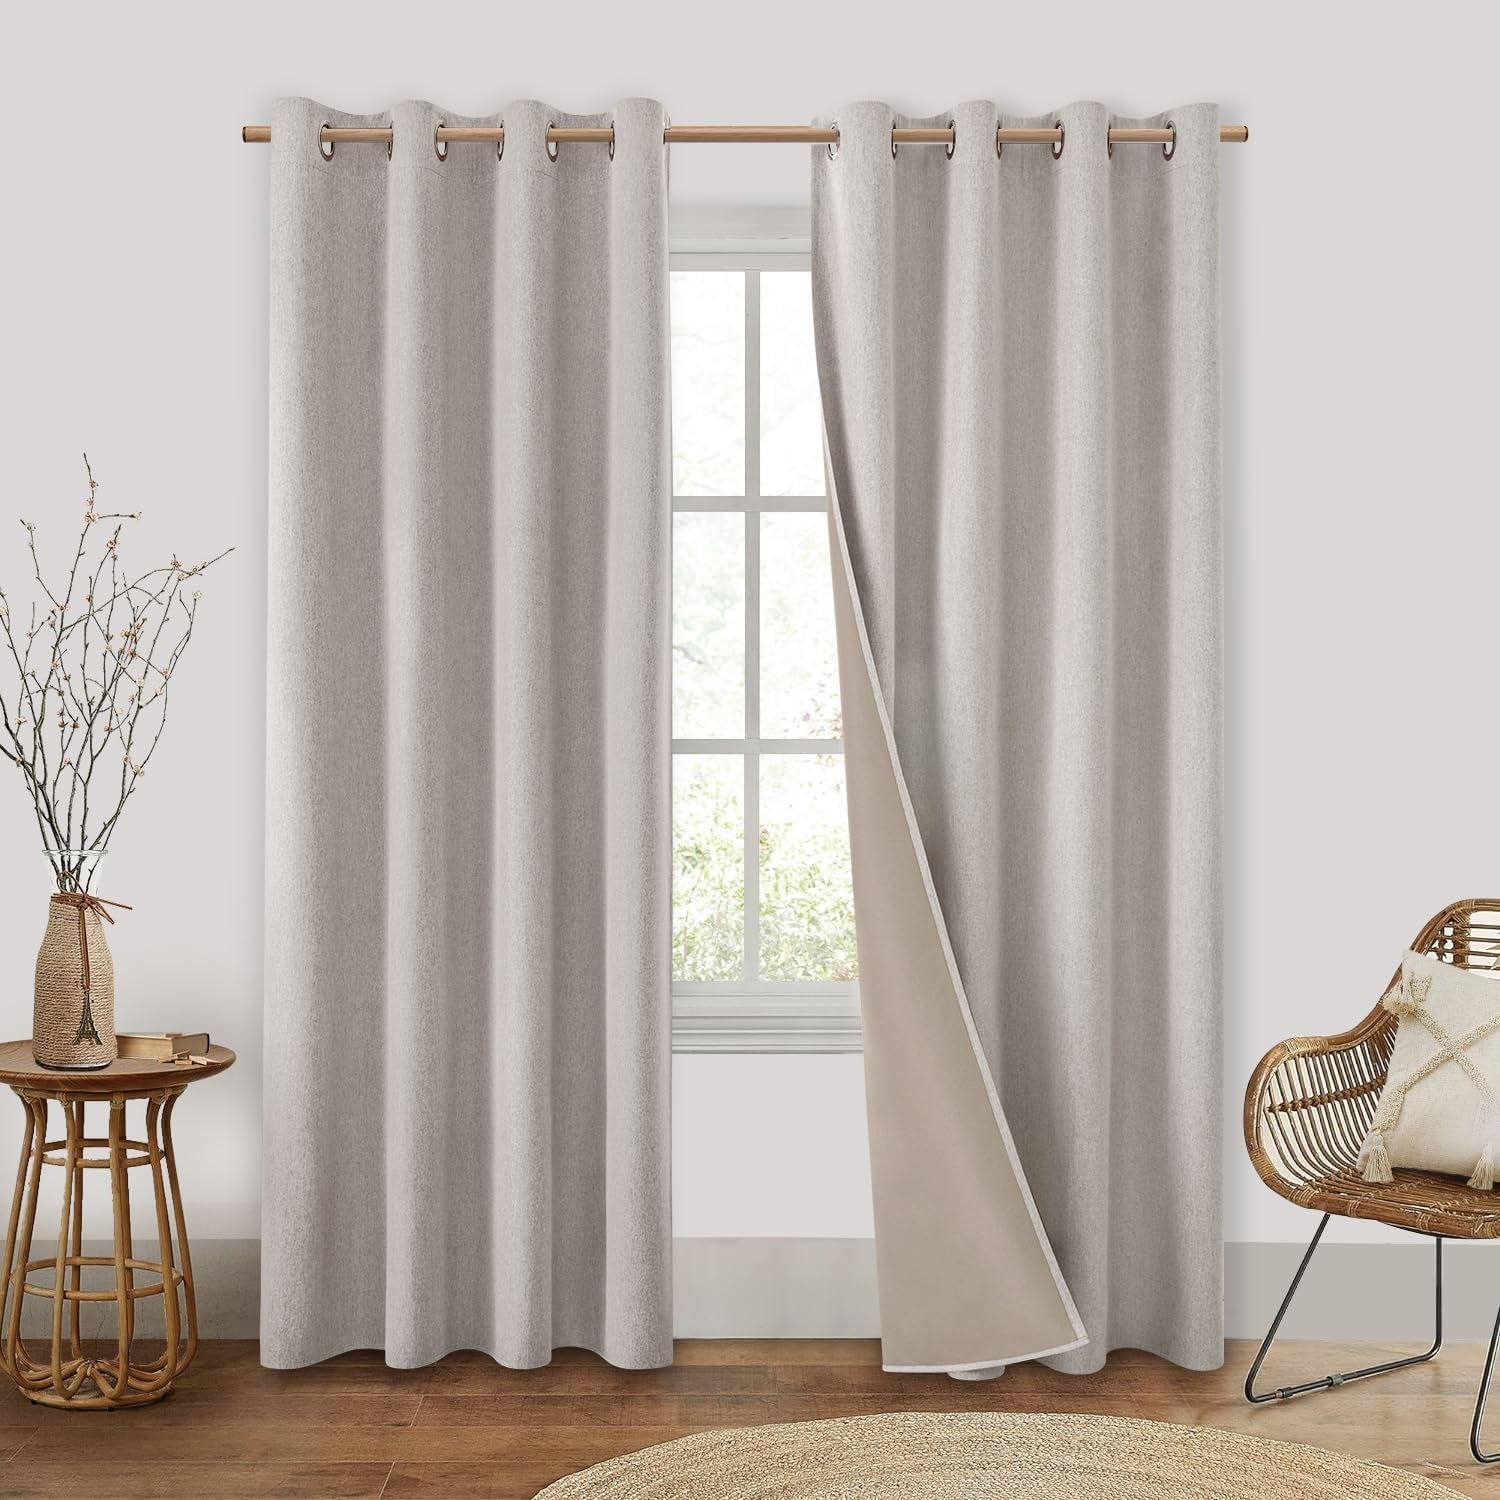 HOMEIDEAS 100% Blackout Linen Curtains for Bedroom 84 Inches Long 2 Panels Blush Pink Curtains Full Black Out Thermal Insulated Grommet Window Curtains/Drapes with Liner for Nursery  HOMEIDEAS Natural 52"W X 84"L 